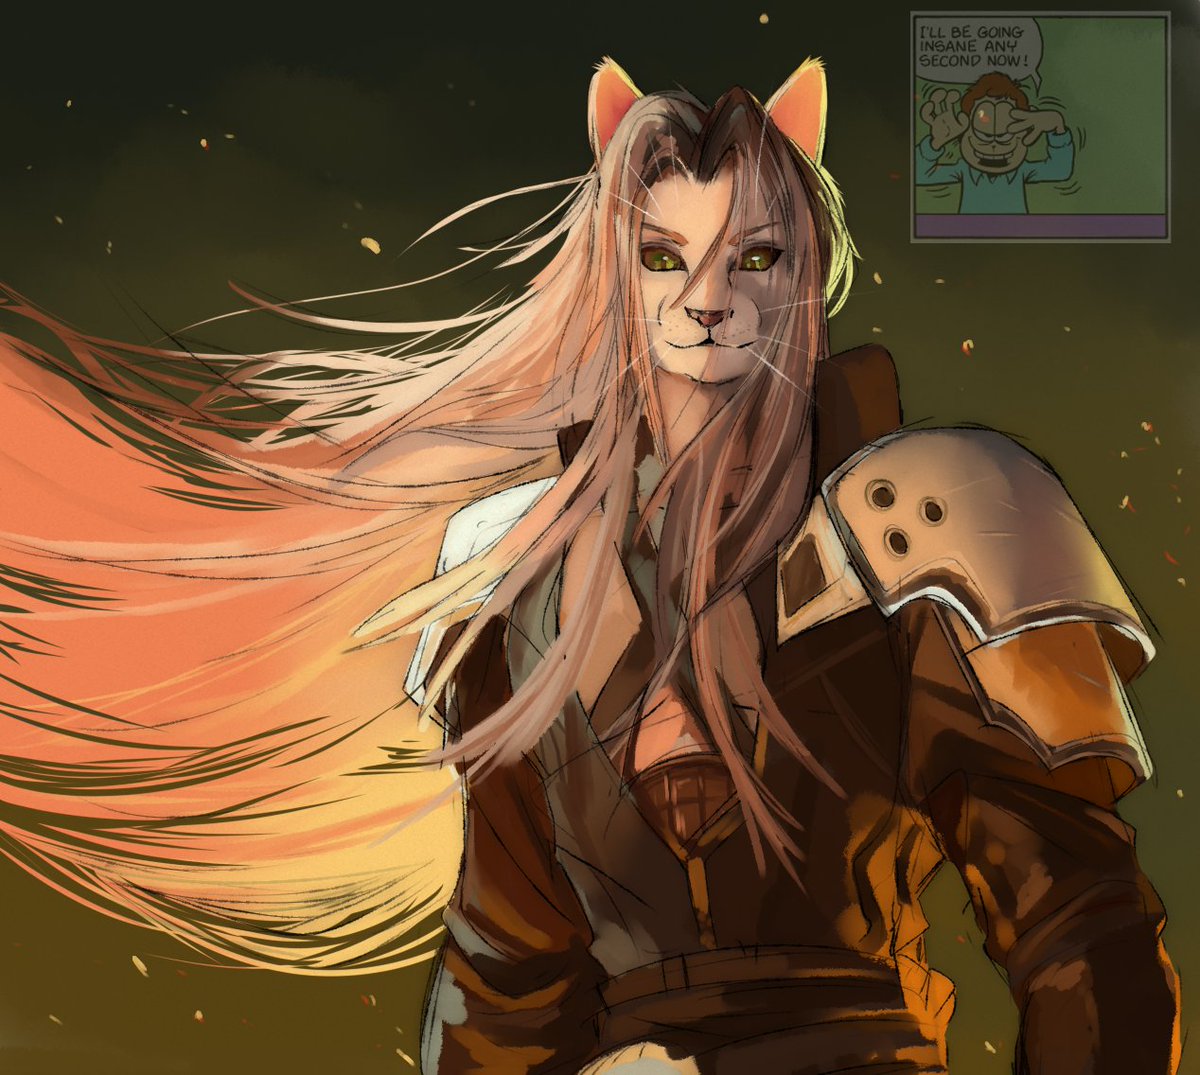 So excited for FF7 Rebirth I could explode, also here's Sephiroth cat